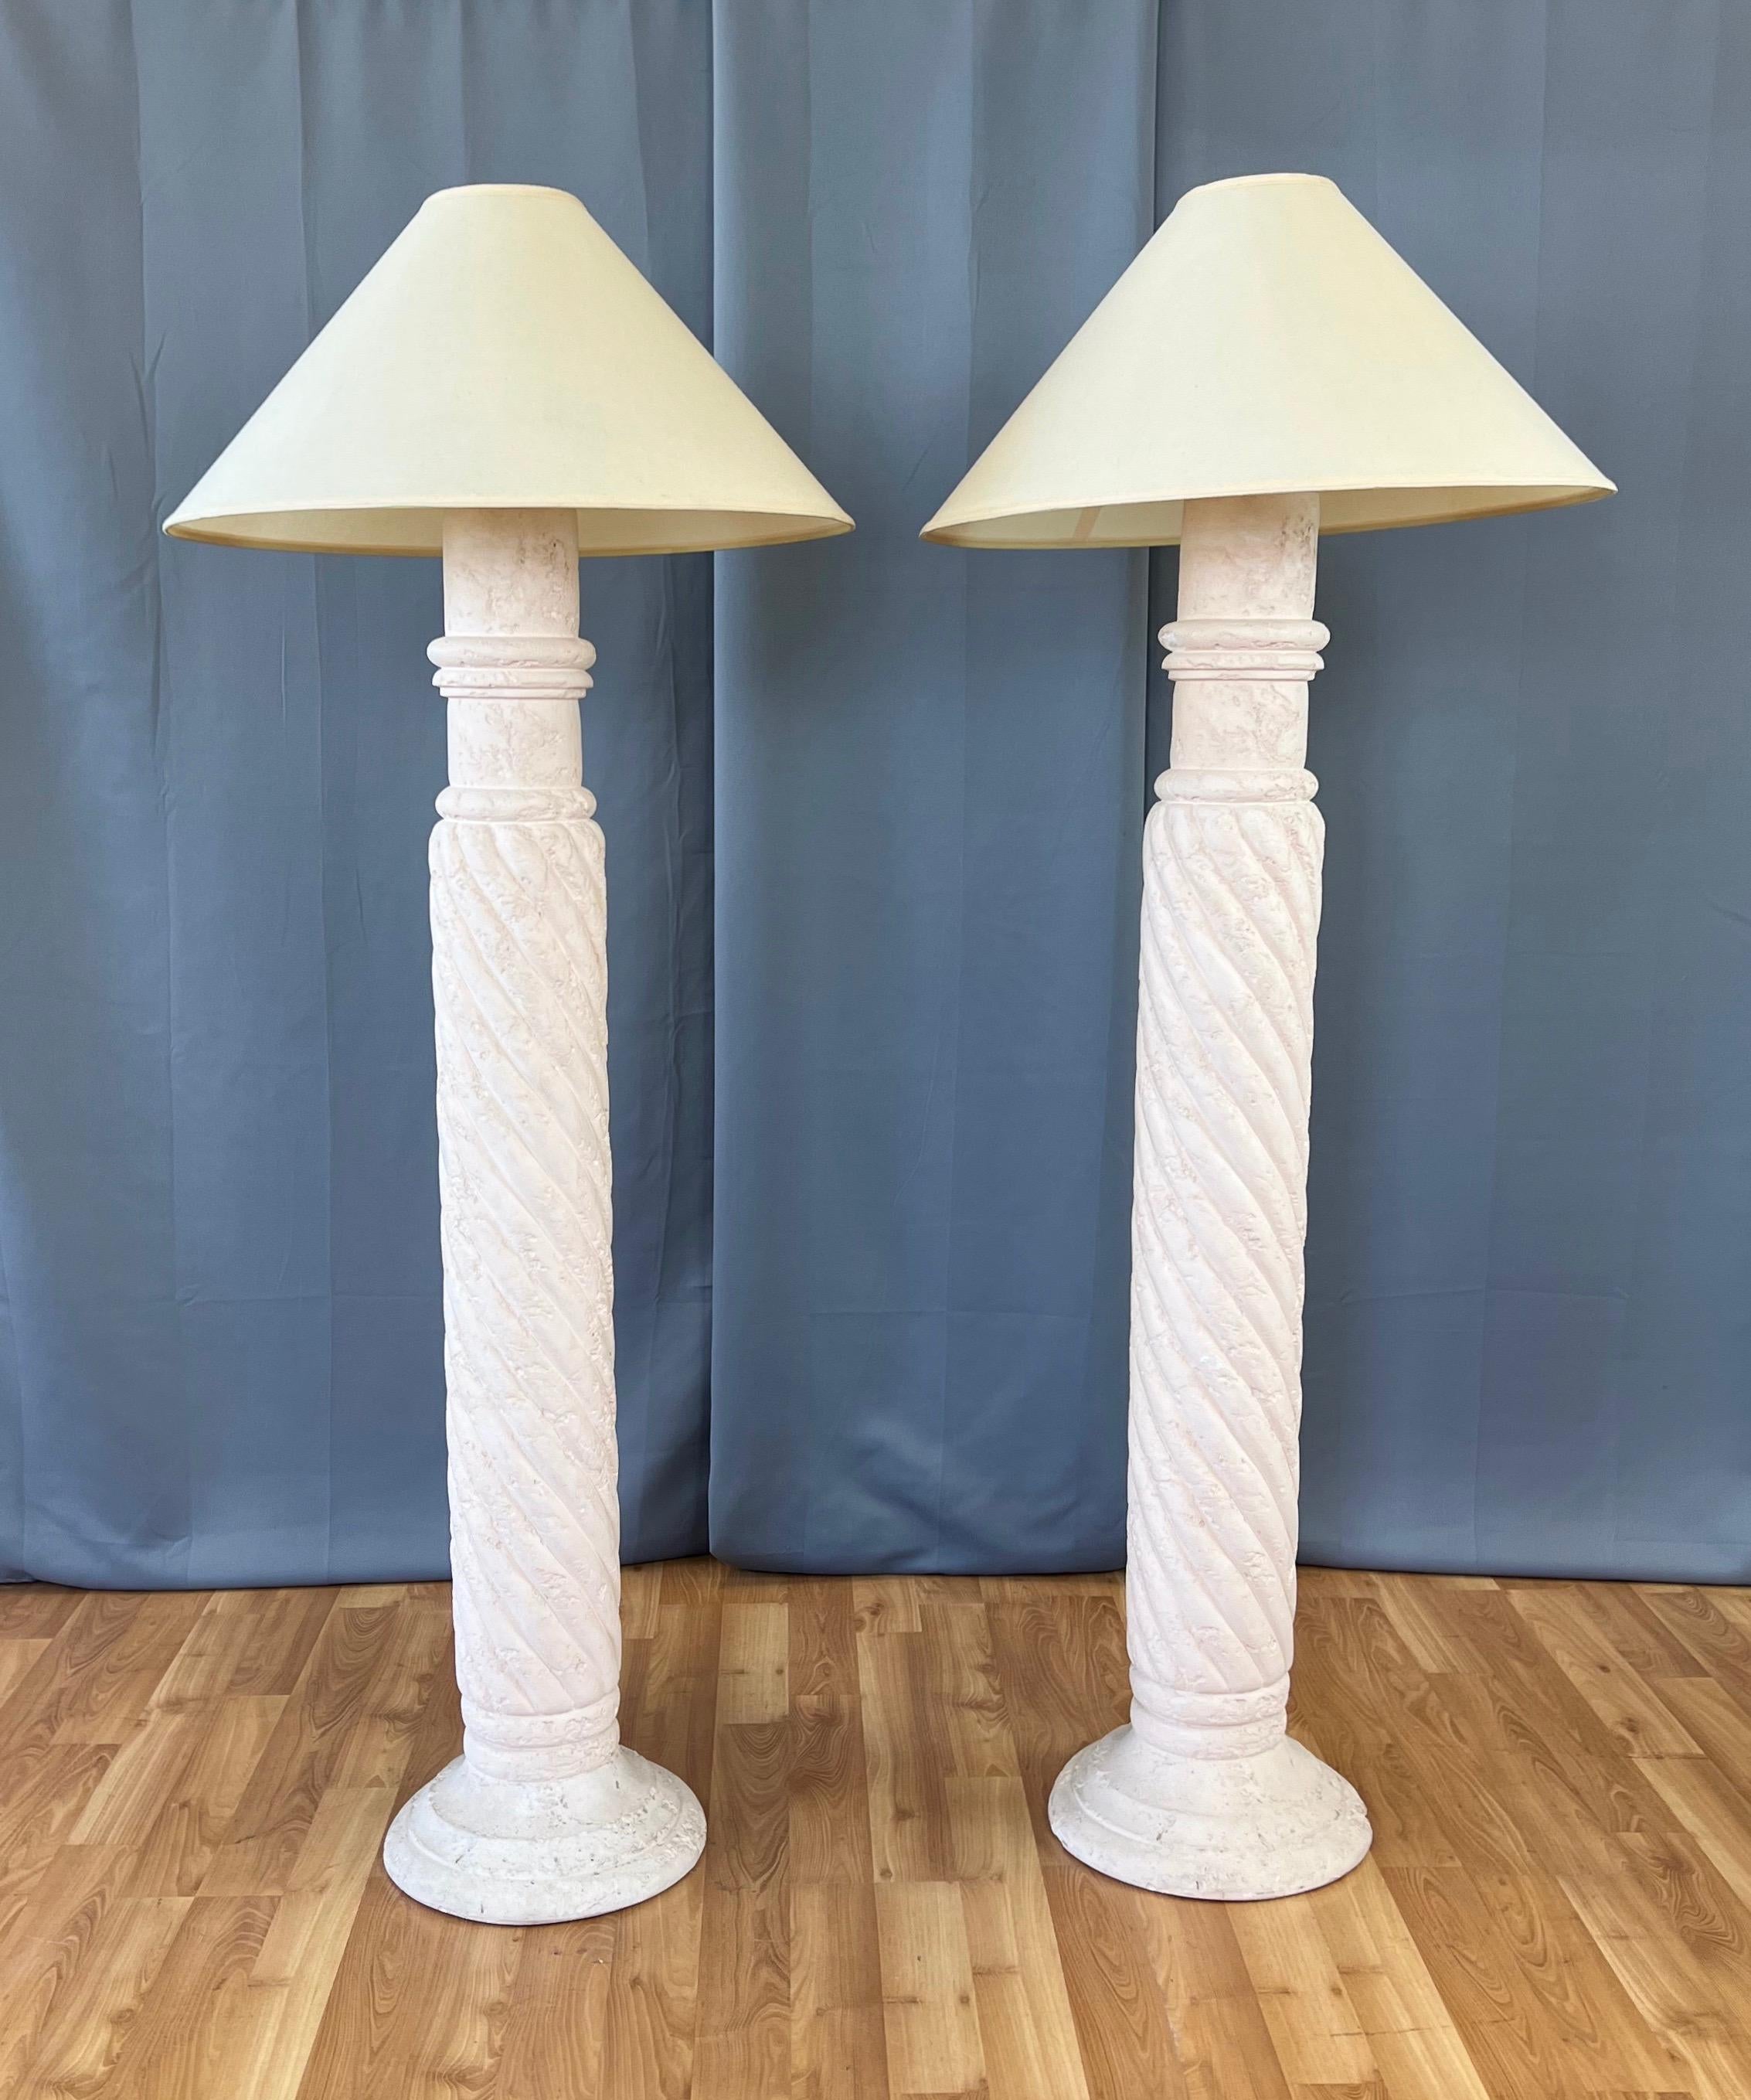 An impressive pair of 1980s pale pink plaster spiral column floor lamps with shades, done in the manner of Michael Taylor for Kreiss.

Substantial column with a tightly-twisted spiral body, Roman-style multi-band capital, and broad stepped base.